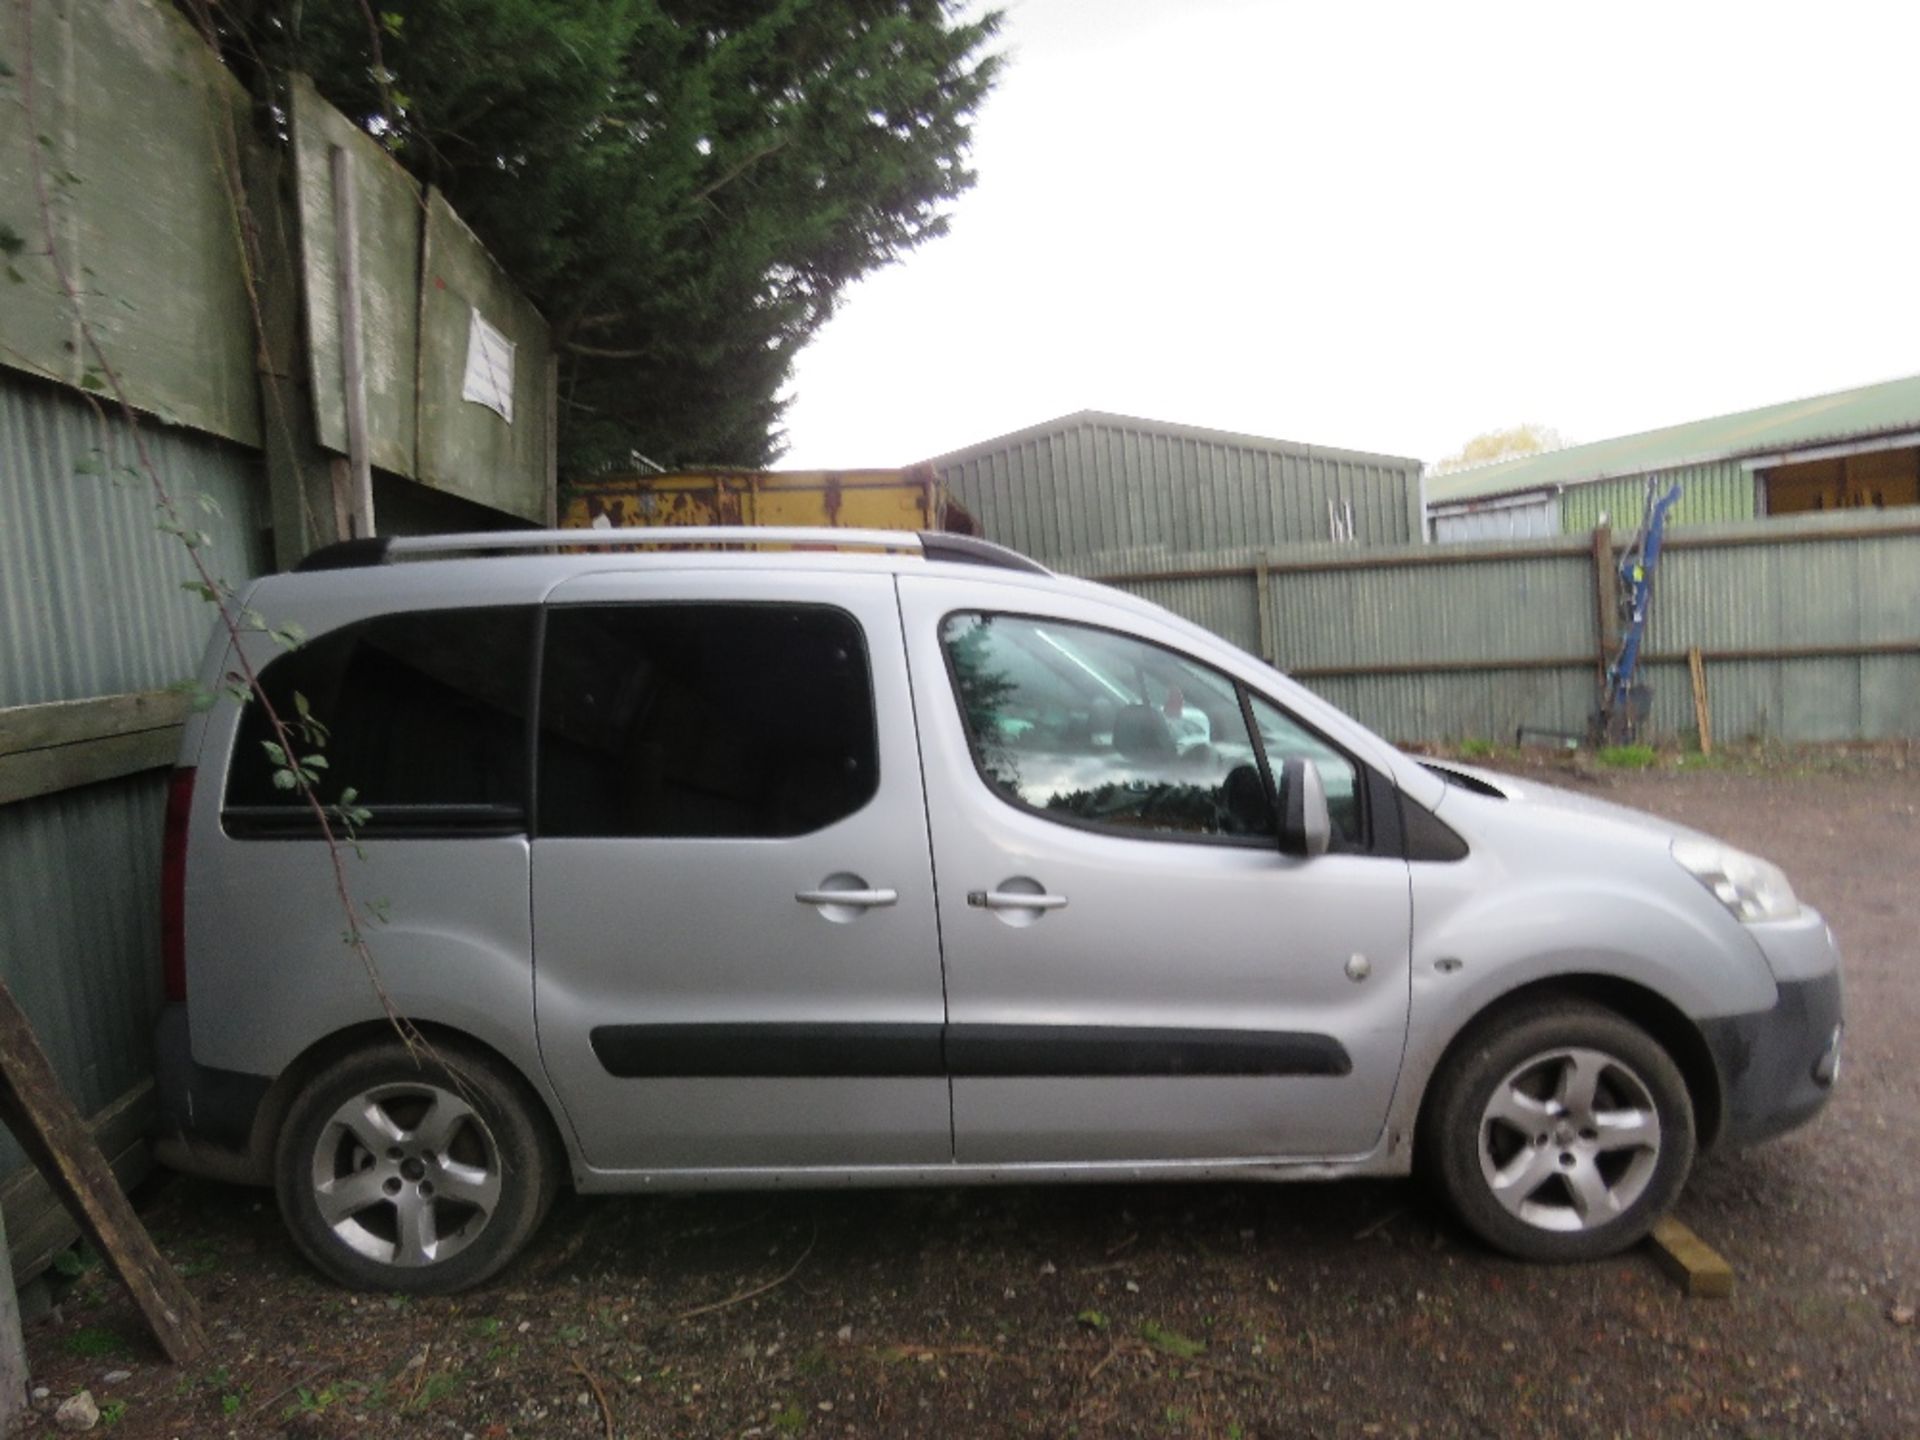 PEUGEOT PARTNER CAR REG:AXZ 3843. WITH V5 FIRST REGISTERED 23/10/2010. MOT EXPIRED. MANUAL GEARBOX. - Image 7 of 8